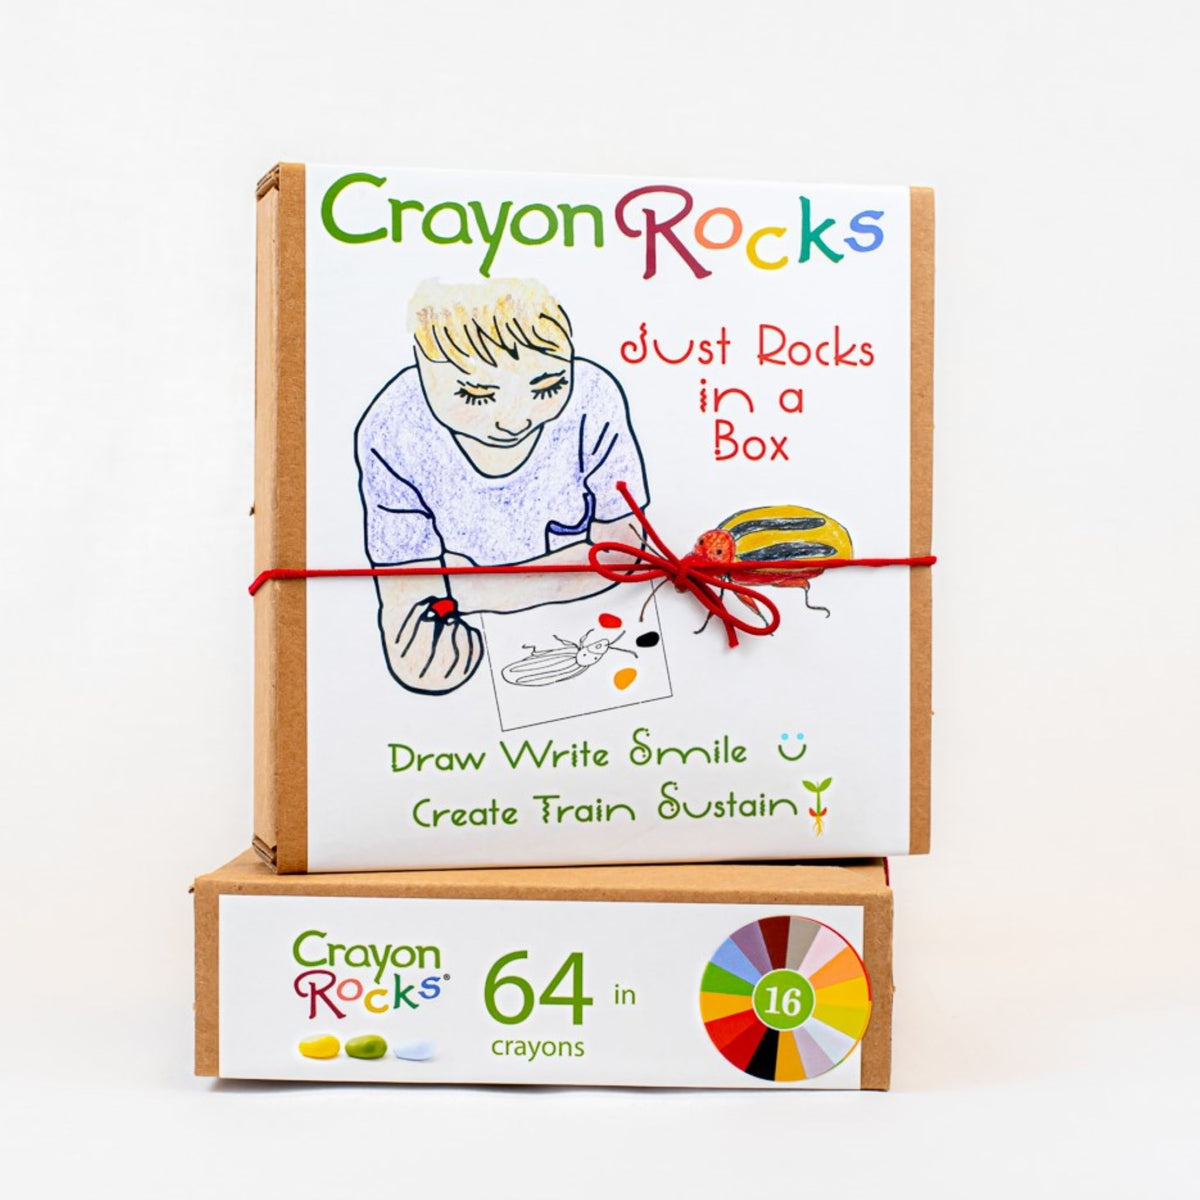 Just Rocks in a Box by Crayon Rocks – Museum Store